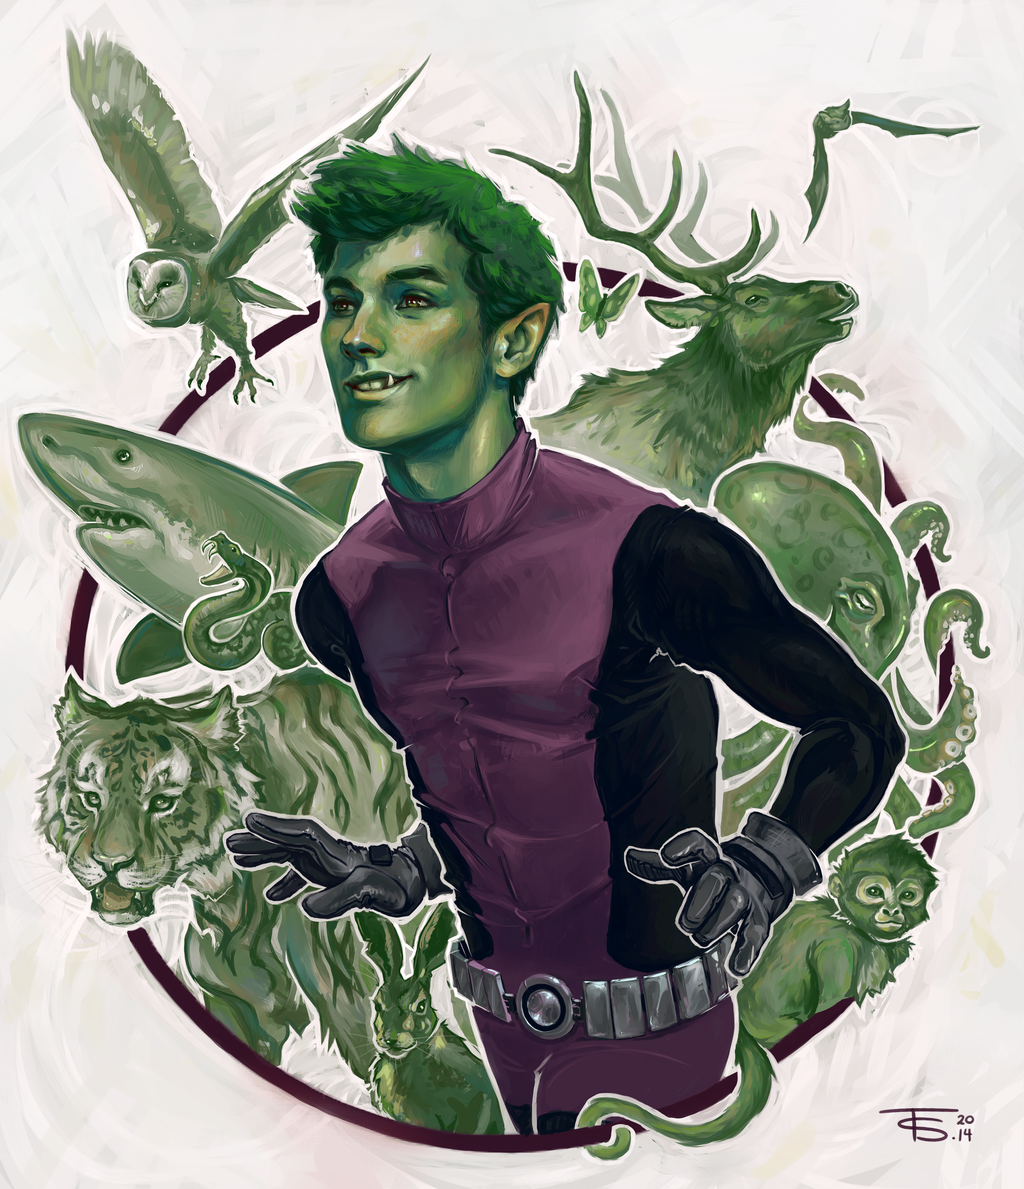 Beast Boy screenshots, images and pictures - Comic Vine